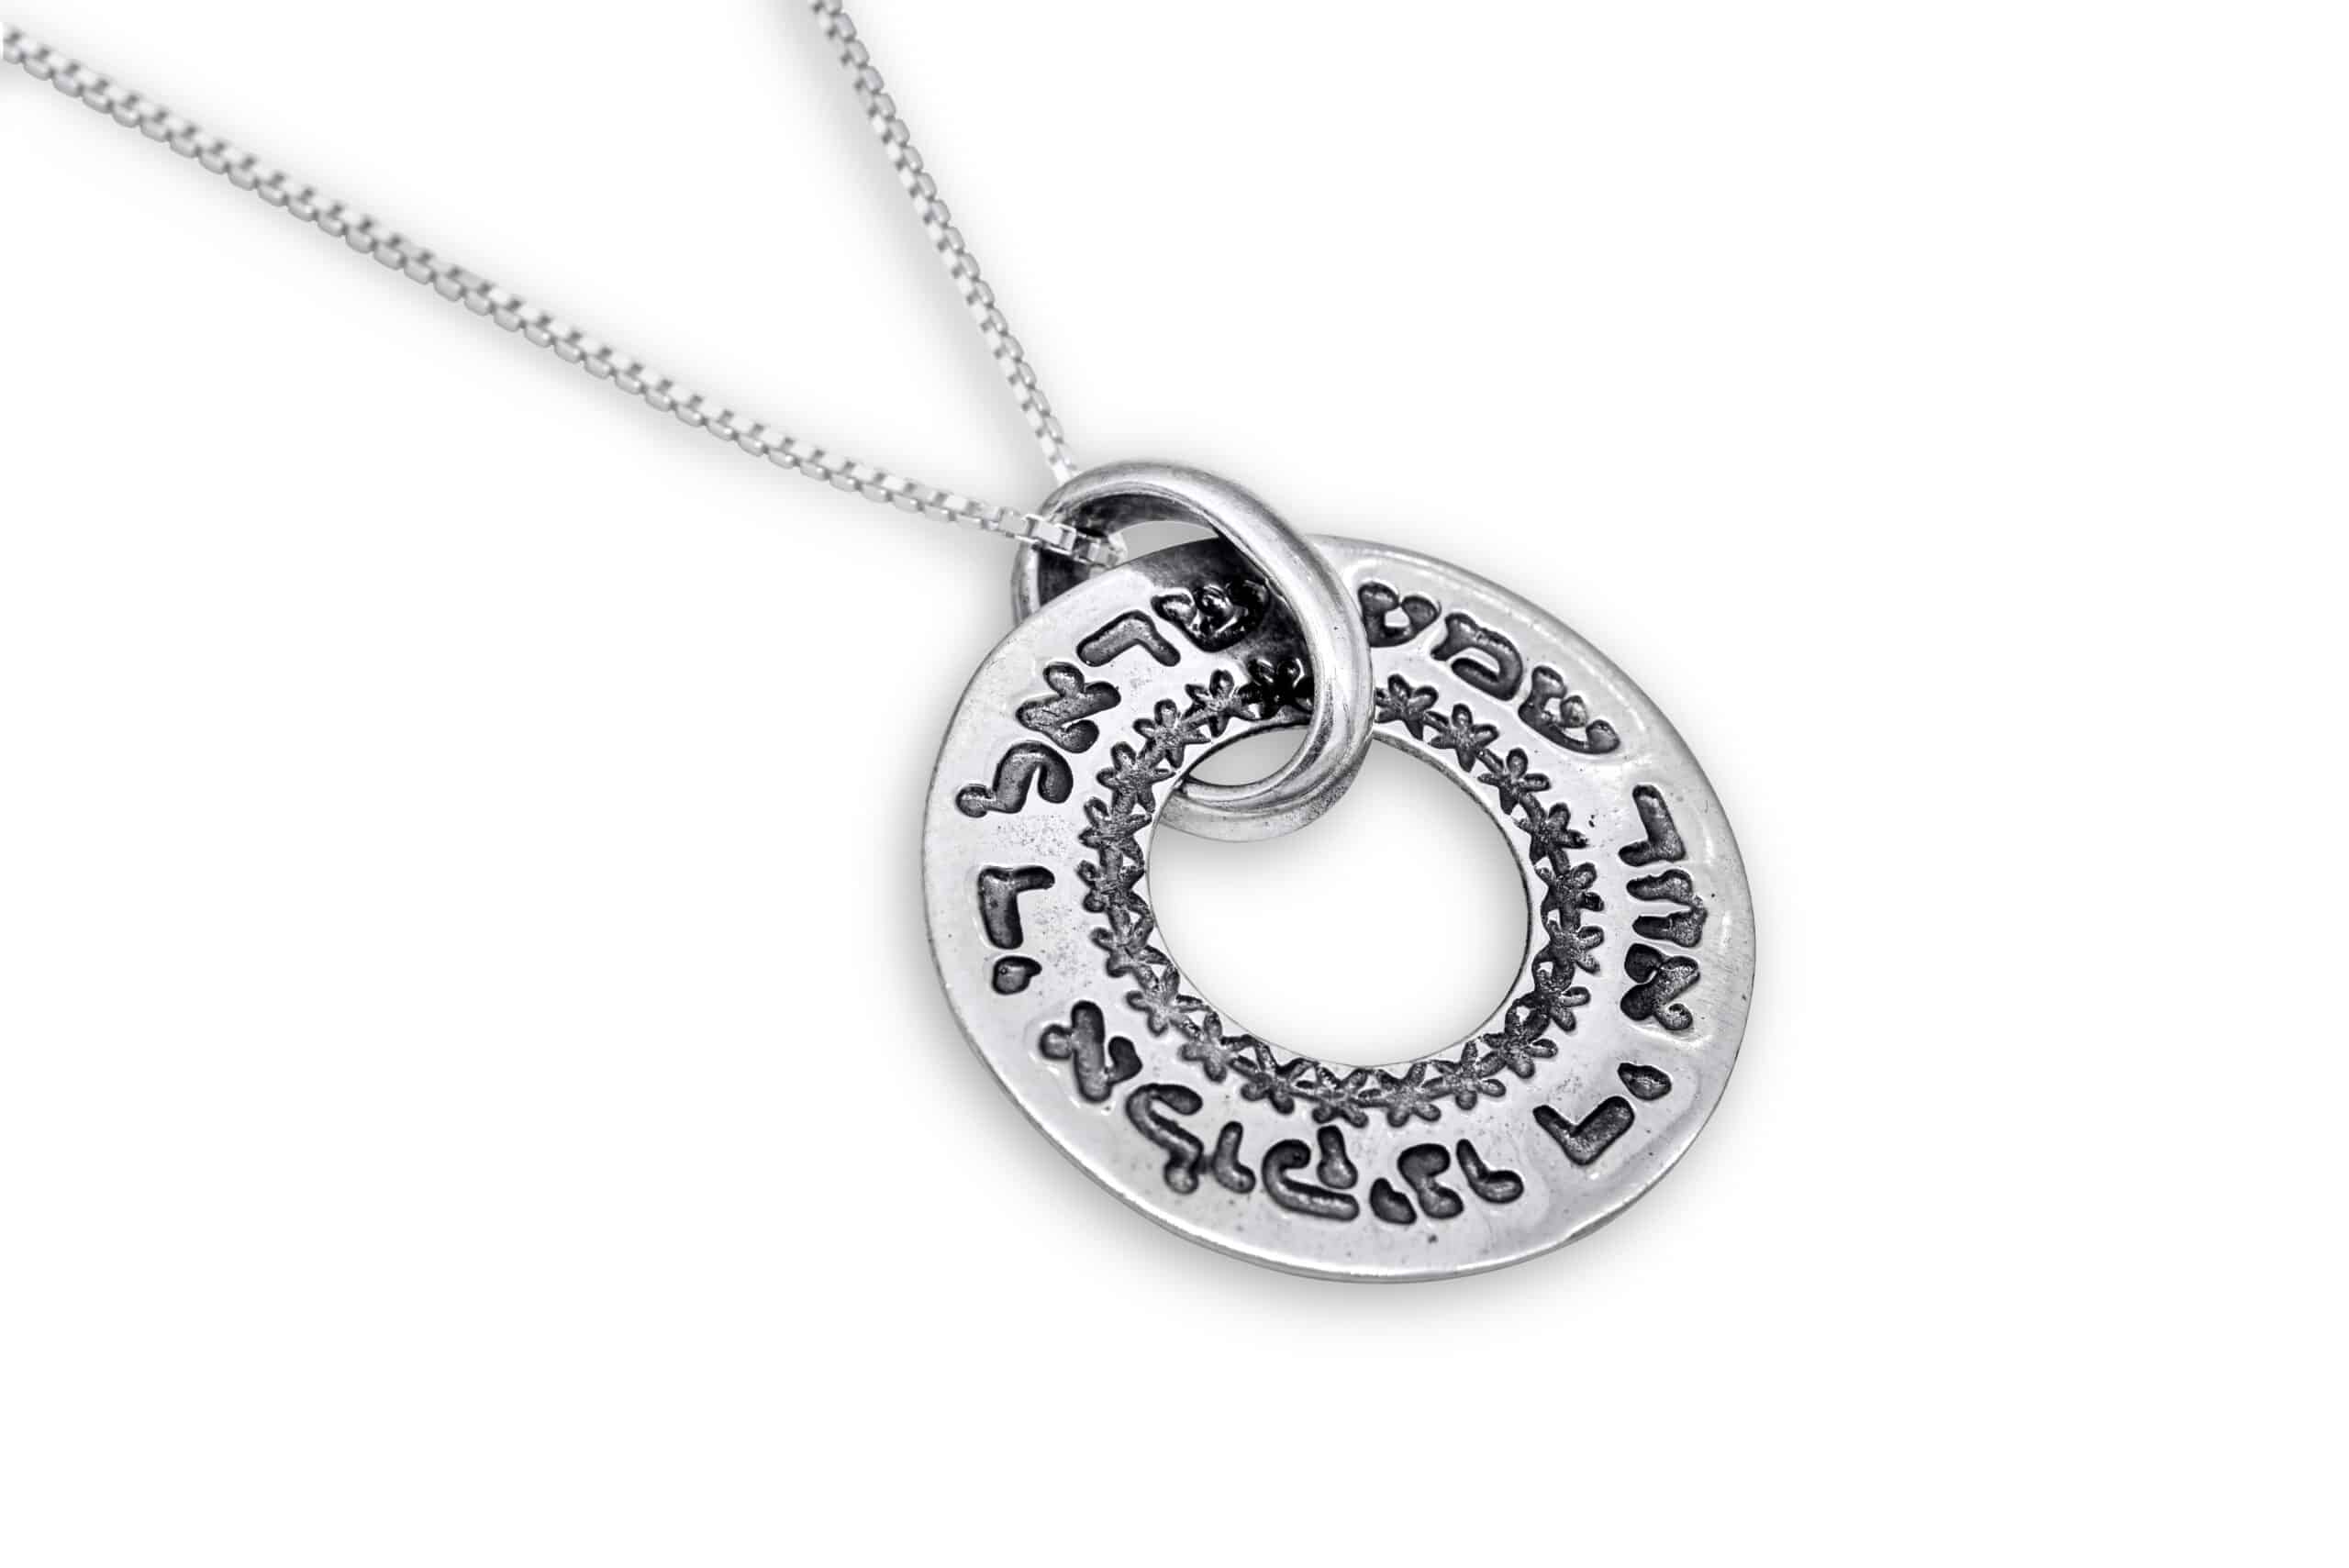 Ring-Shaped Shema Israel Silver Pendant with Stars